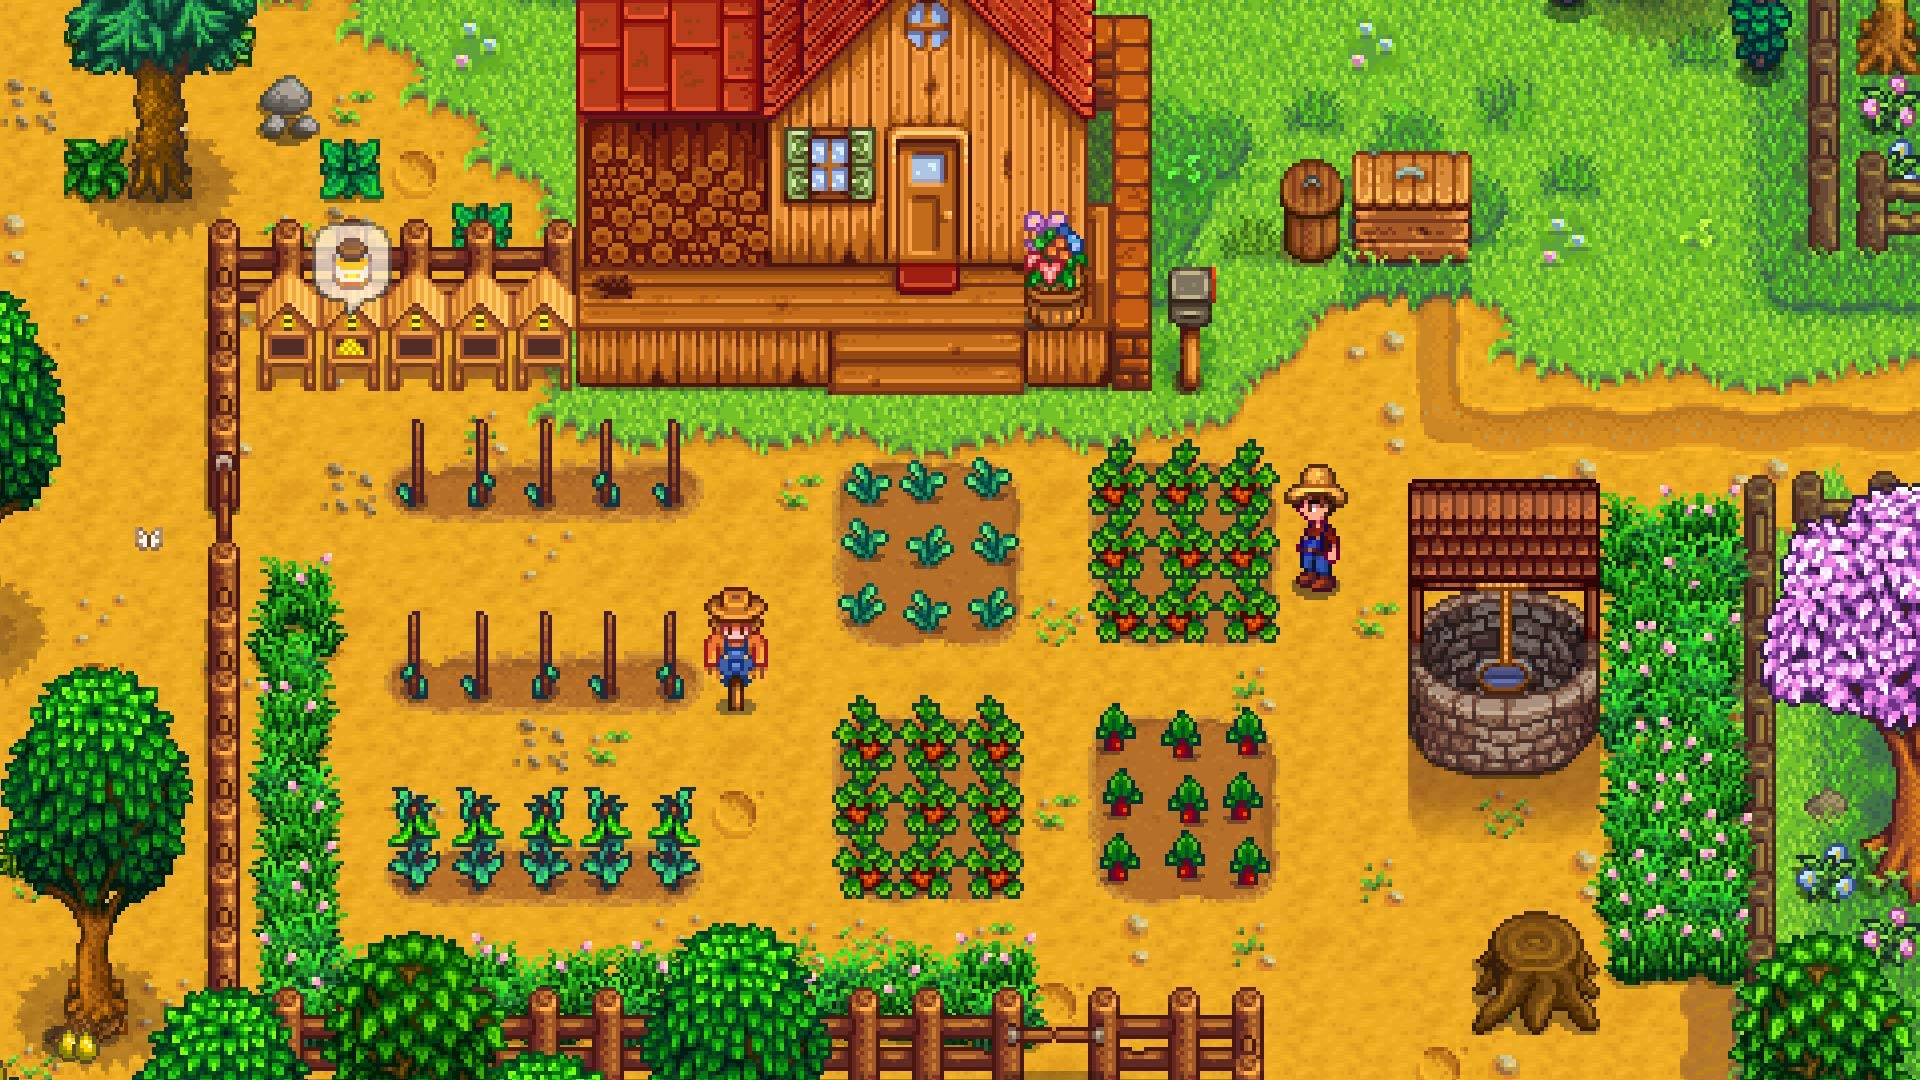 Colorful farm scene from the game Stardew Valley